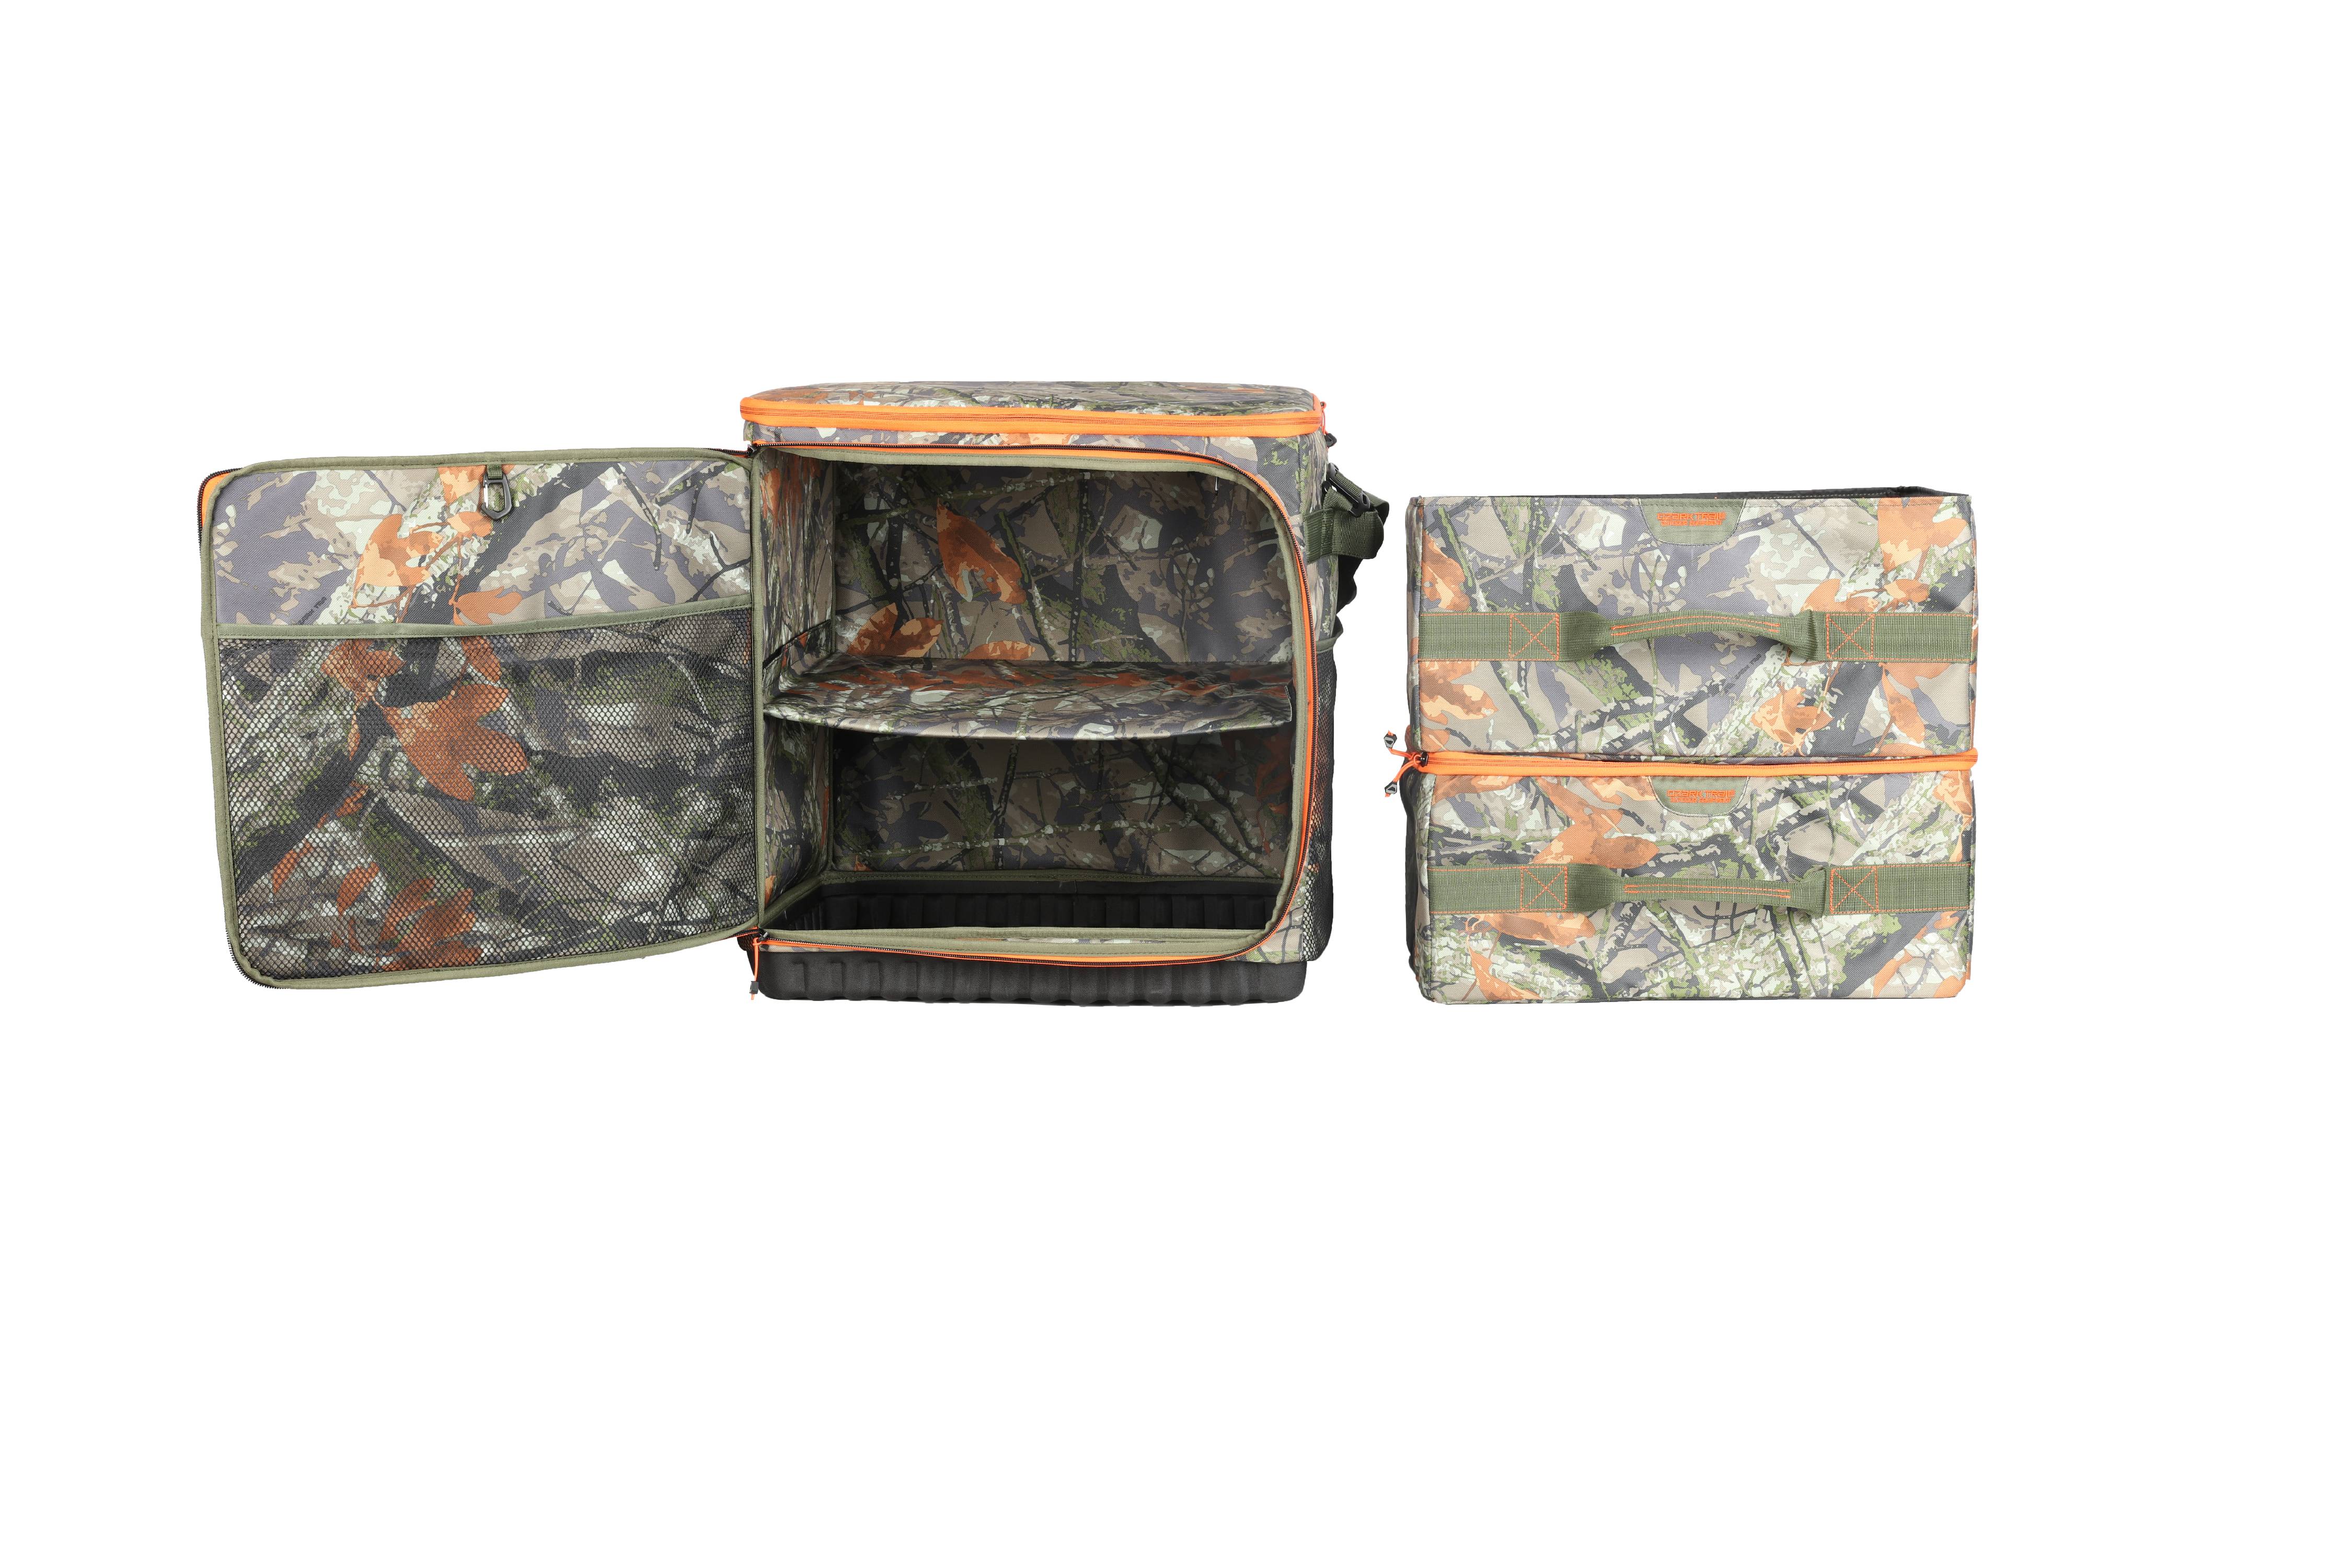 Ozark Trail Crane Lake Deluxe Camp and Outdoor Storage Organizer, Green Camo - image 4 of 10